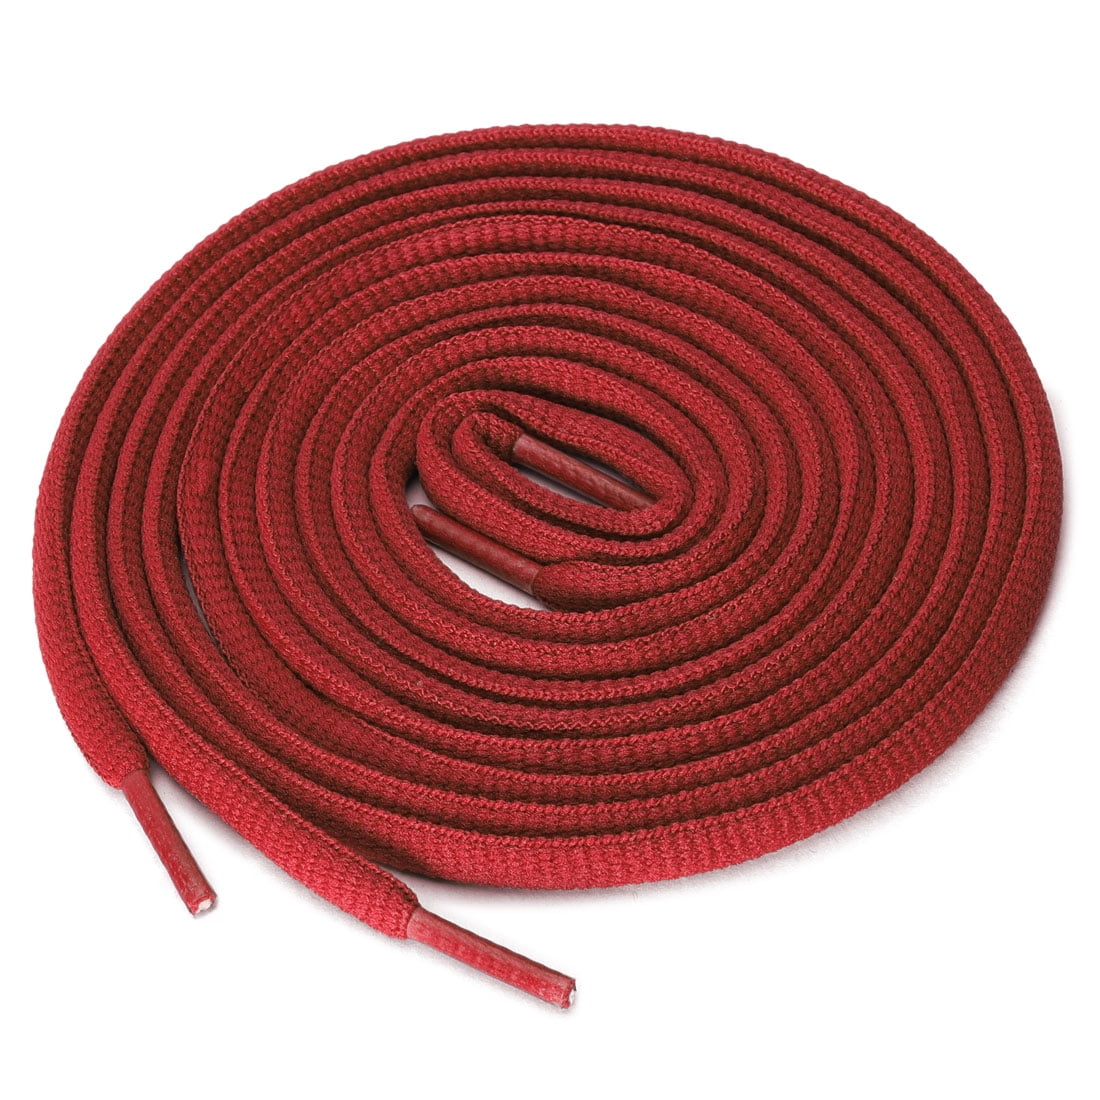 2 Pairs Oval 36",45" Athletic Sports Sneaker "Red" Shoelace Strings 